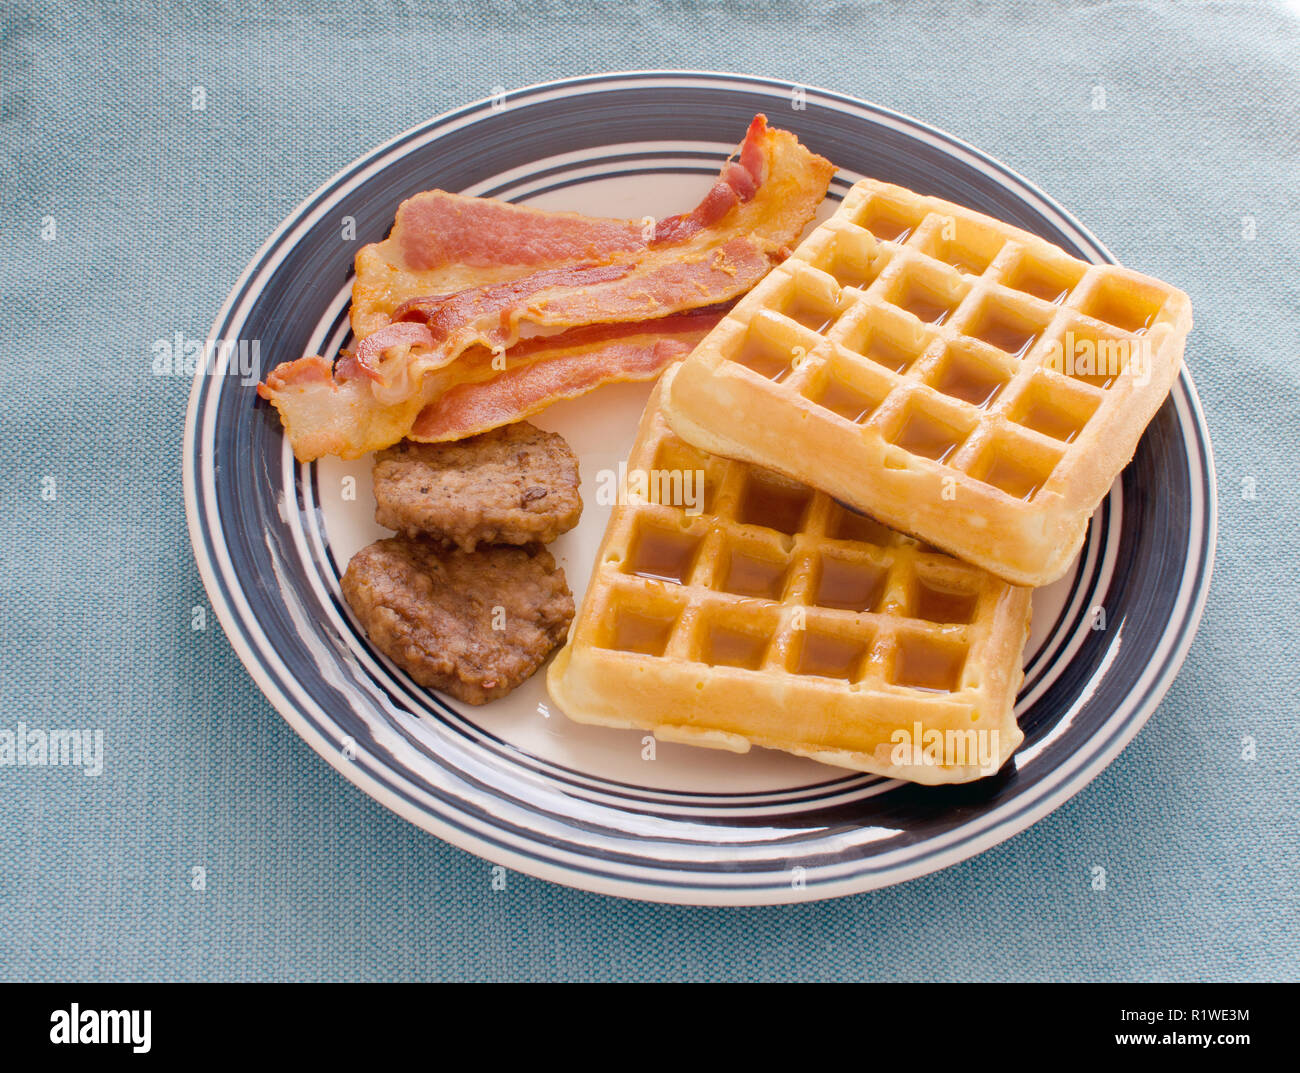 Plate of waffles with maple syrup, bacon and sausage patties Stock Photo